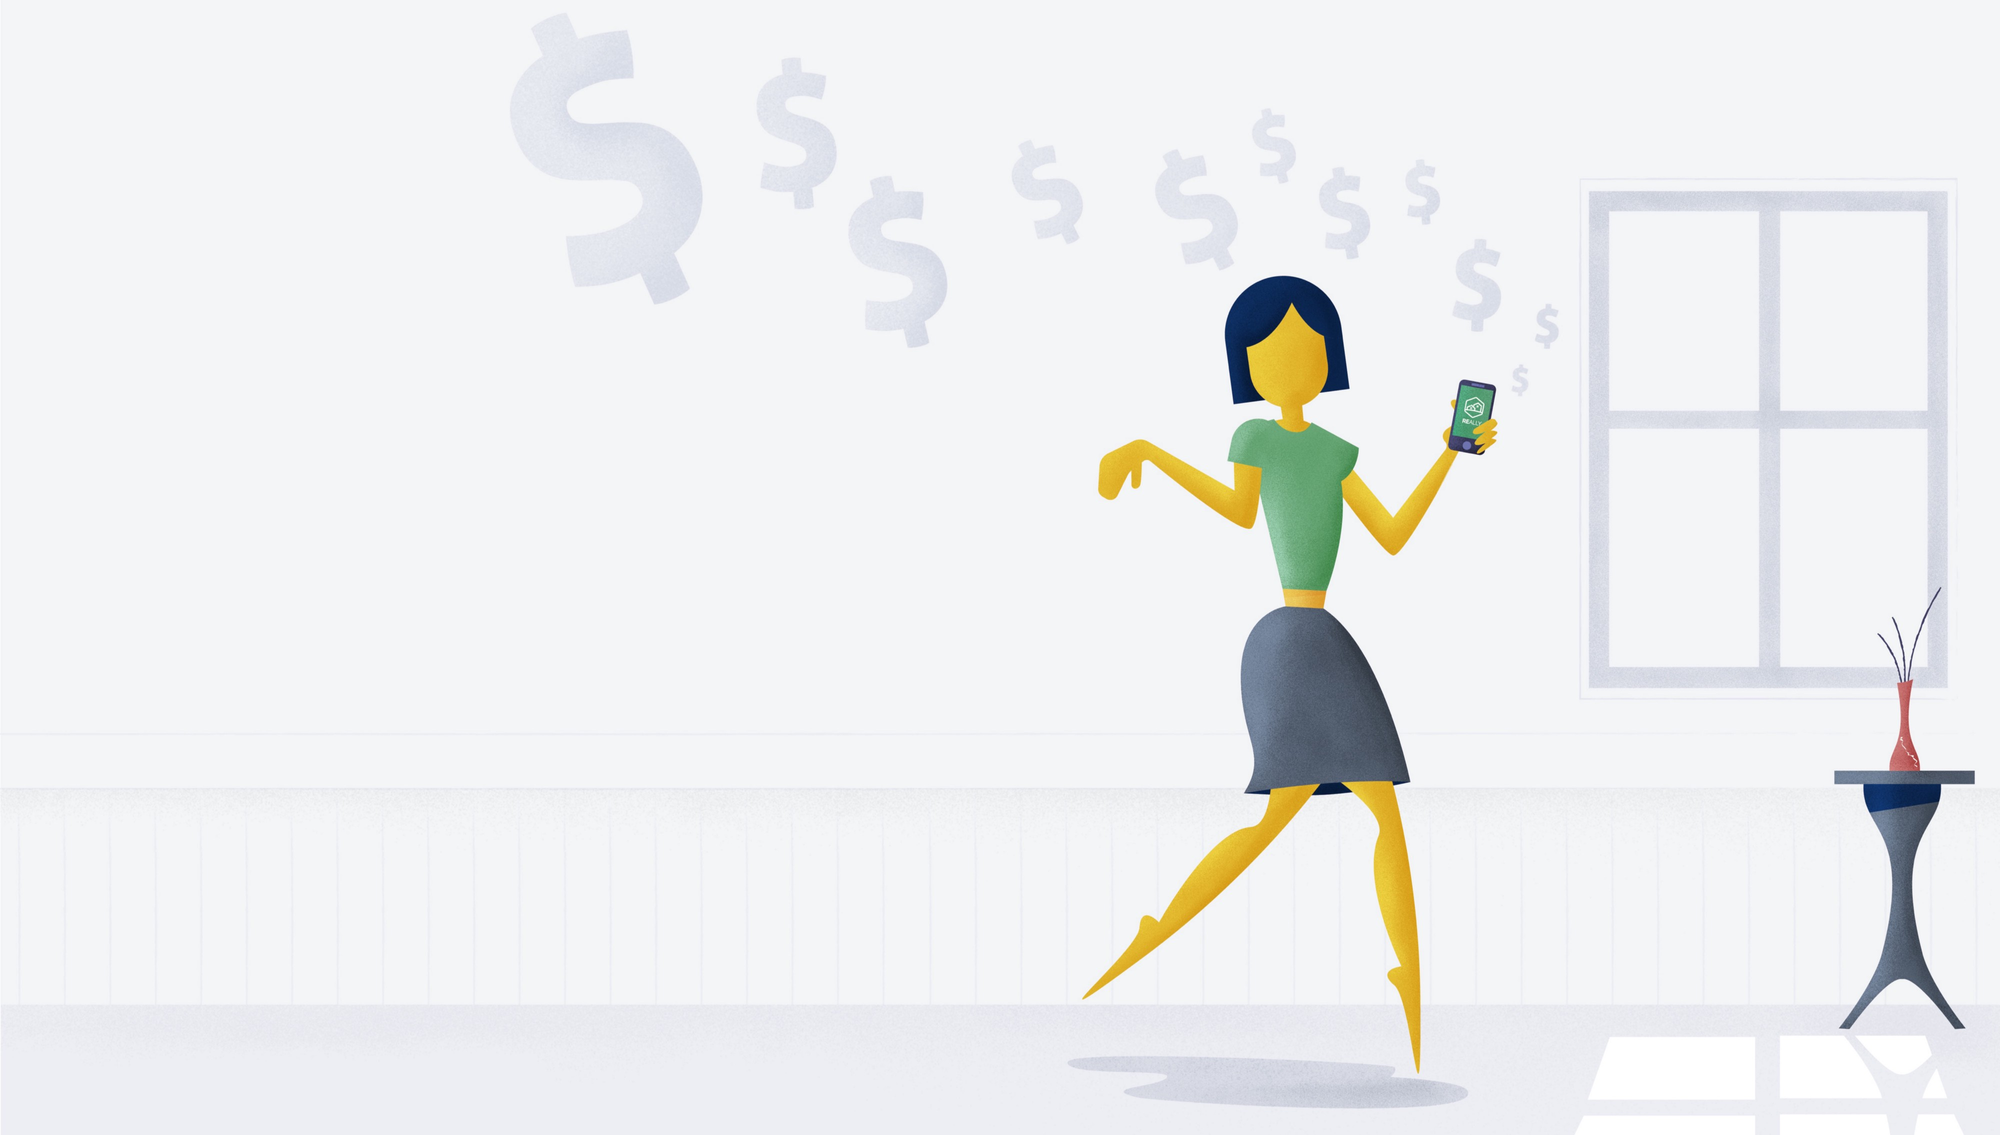 Clip art of women holding phone in a room with money logos flying overhead